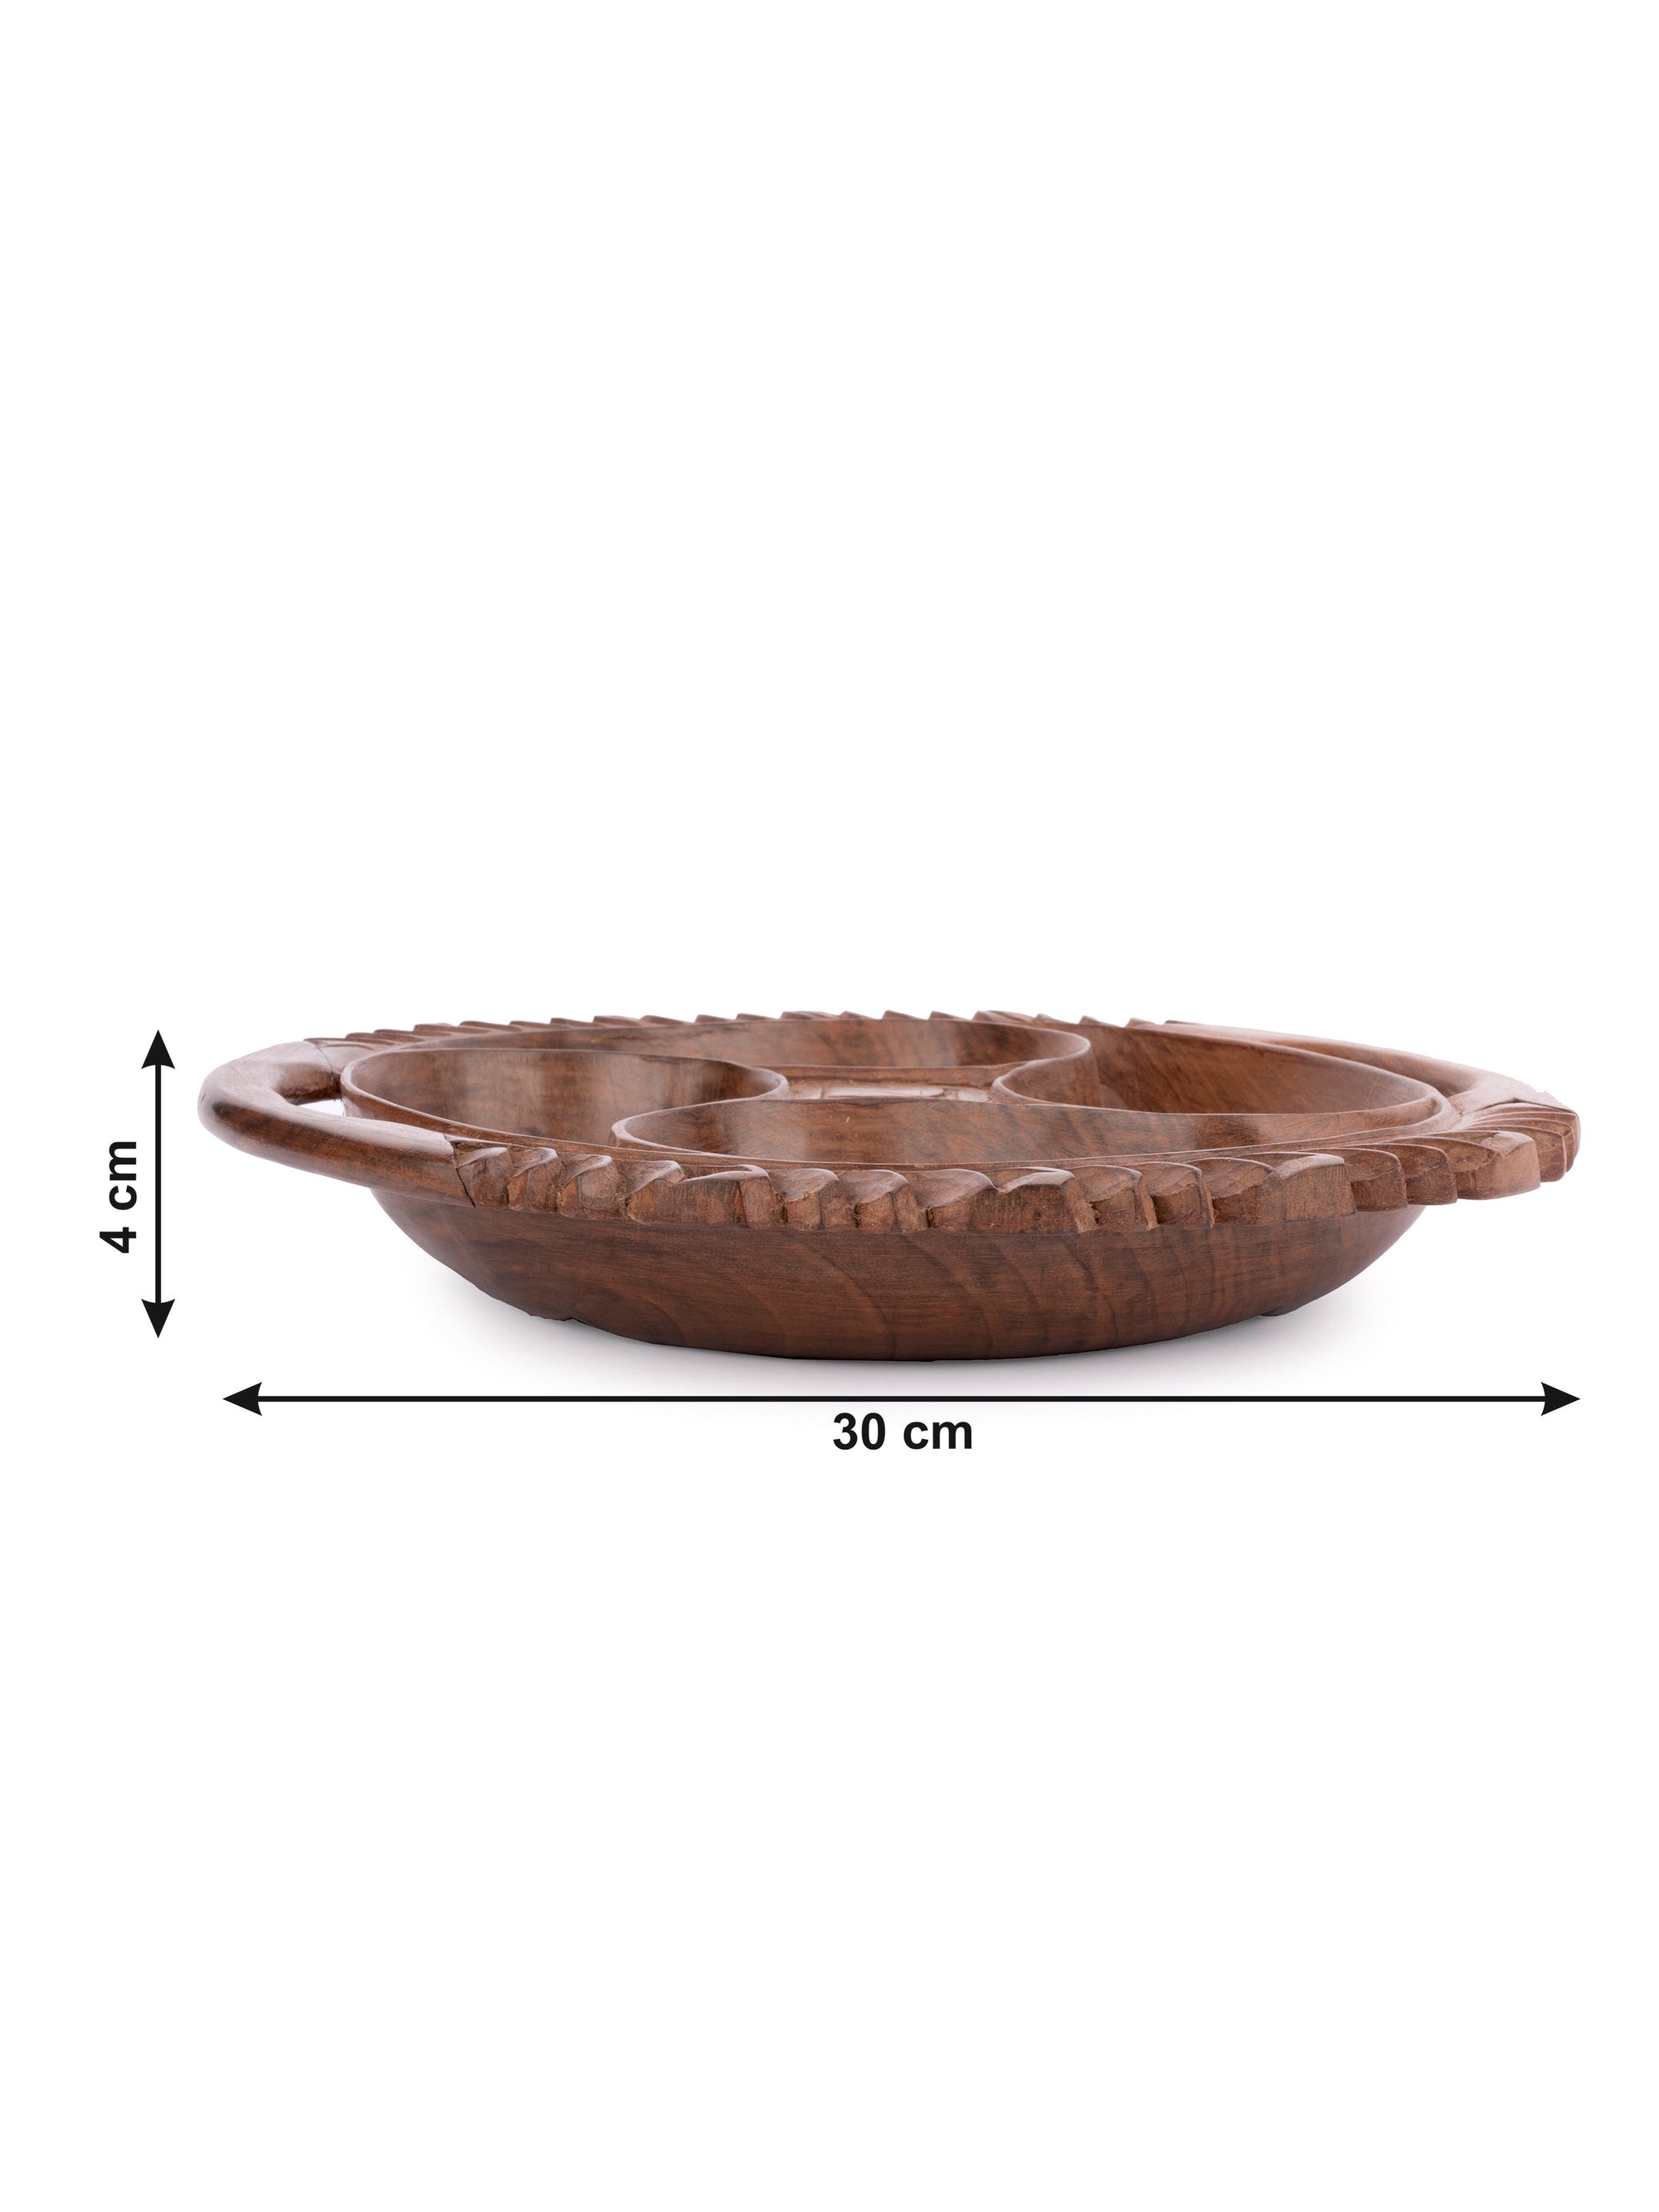 Walnut wood carved Dry Fruit Serving Bowl with 4 compartments - The Heritage Artifacts